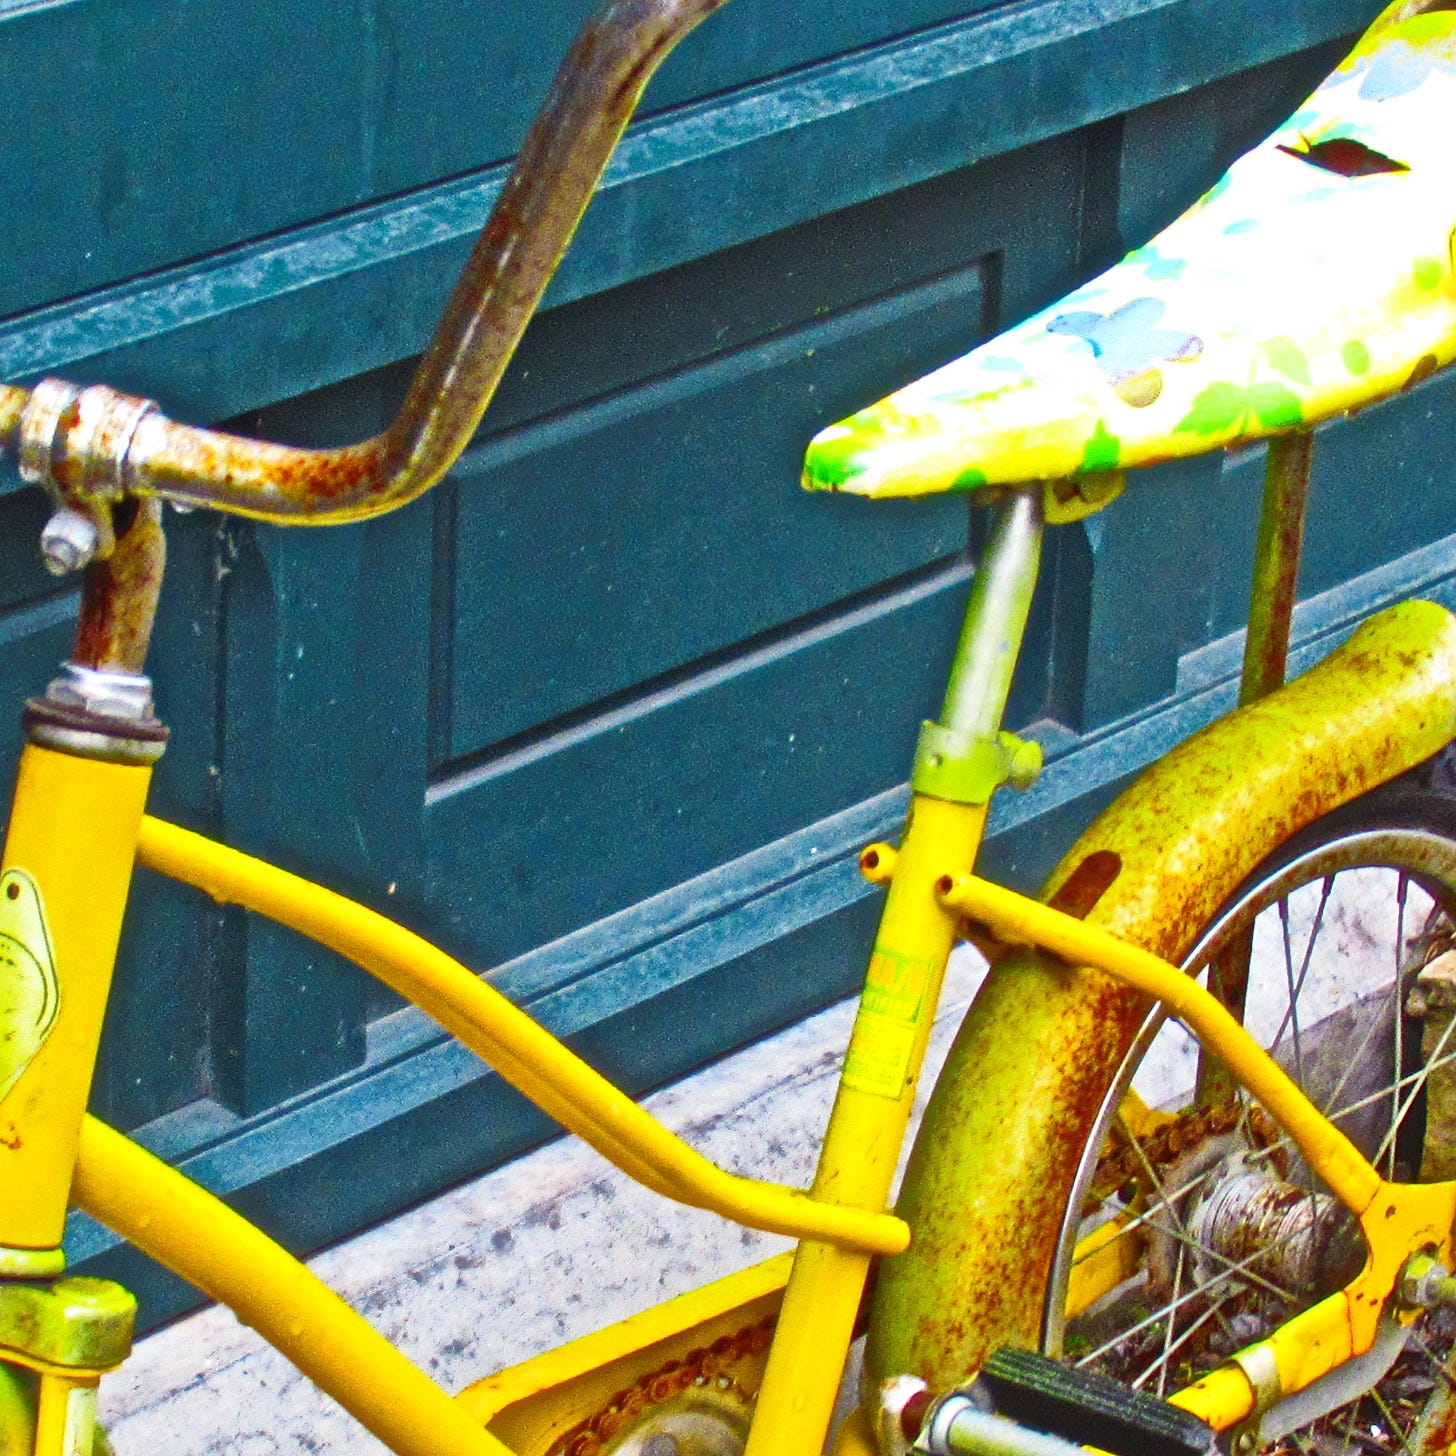 A rusting yellow bike with a bannana seat with a slit in it next to a teal blue facade for a shop.